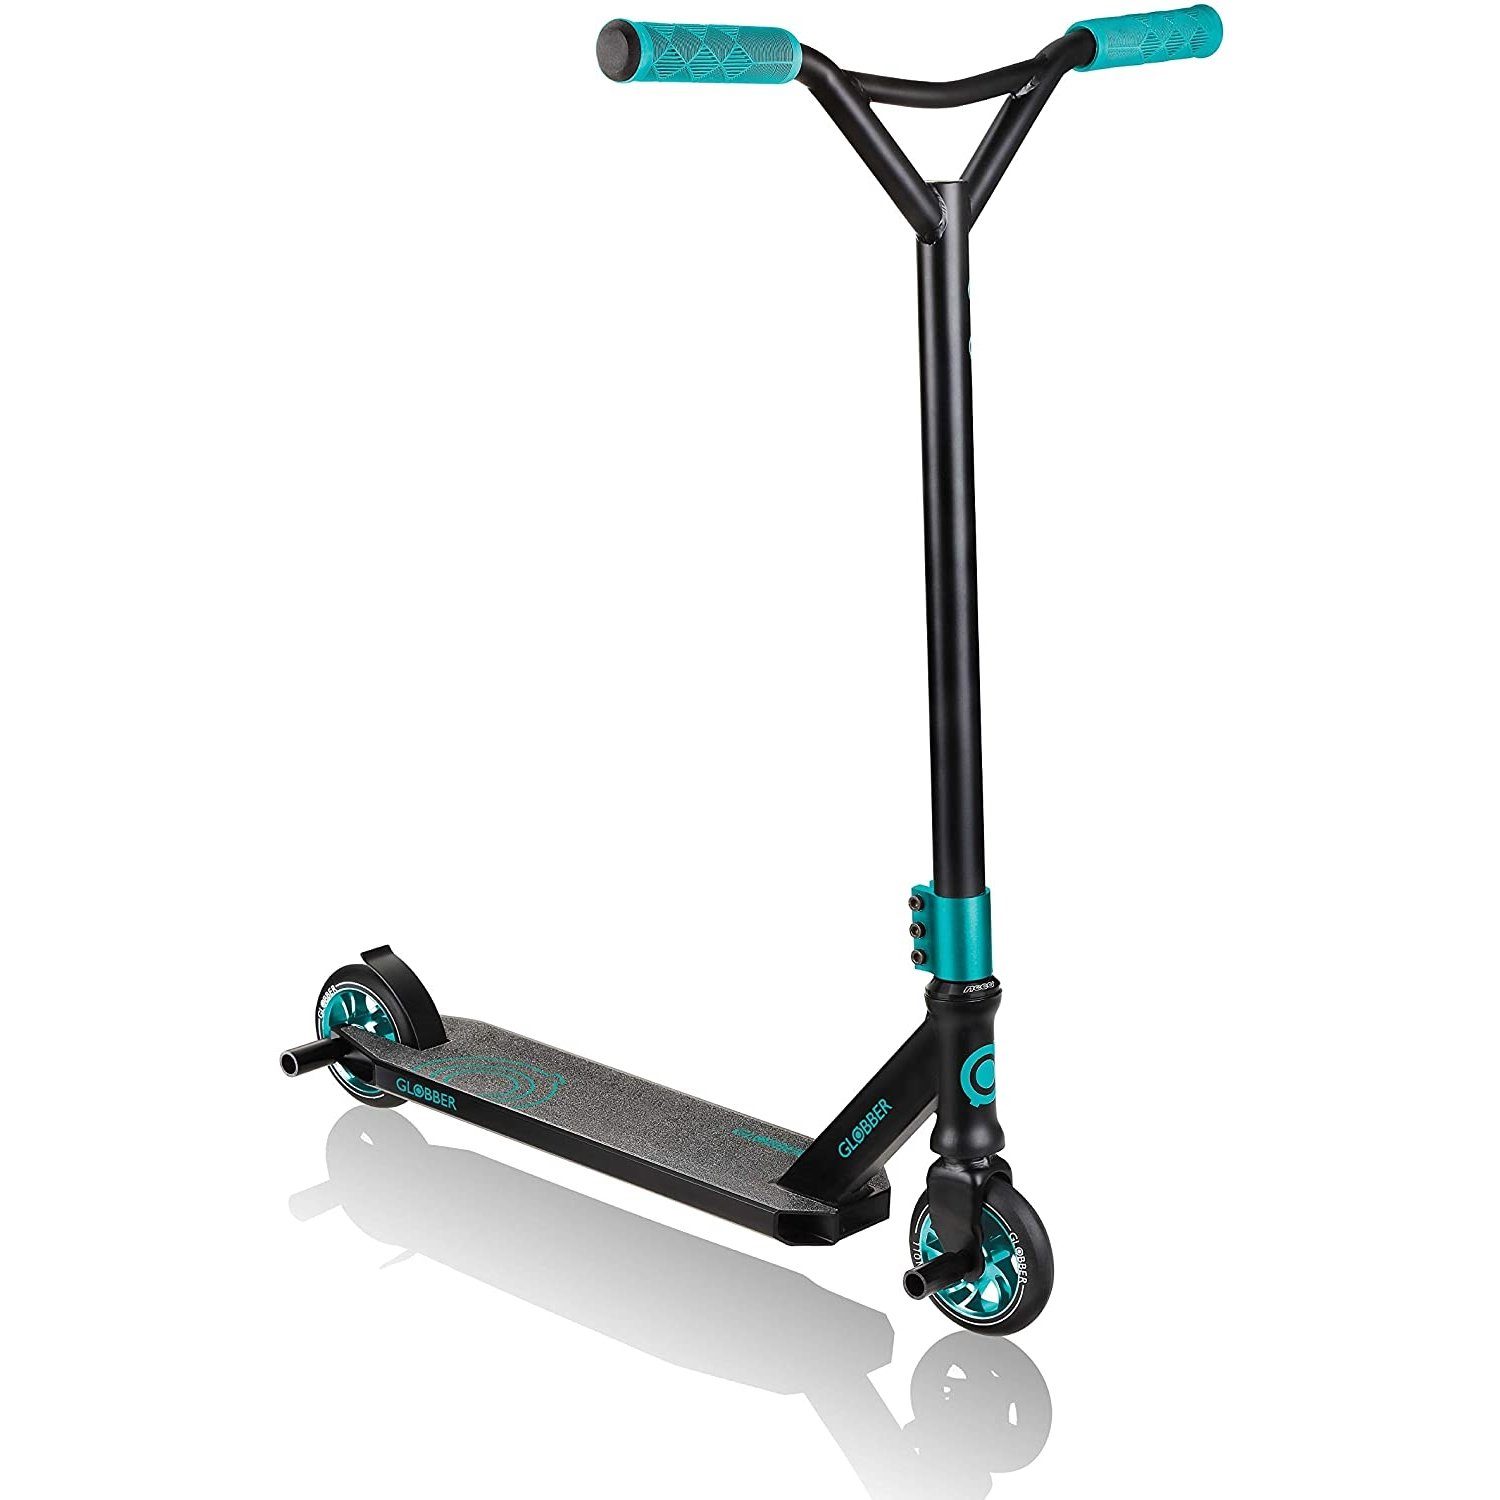 authentic sports & Globber 624-009-2 720 Türkis schwarz-teal Stuntscooter Scooter GS toys